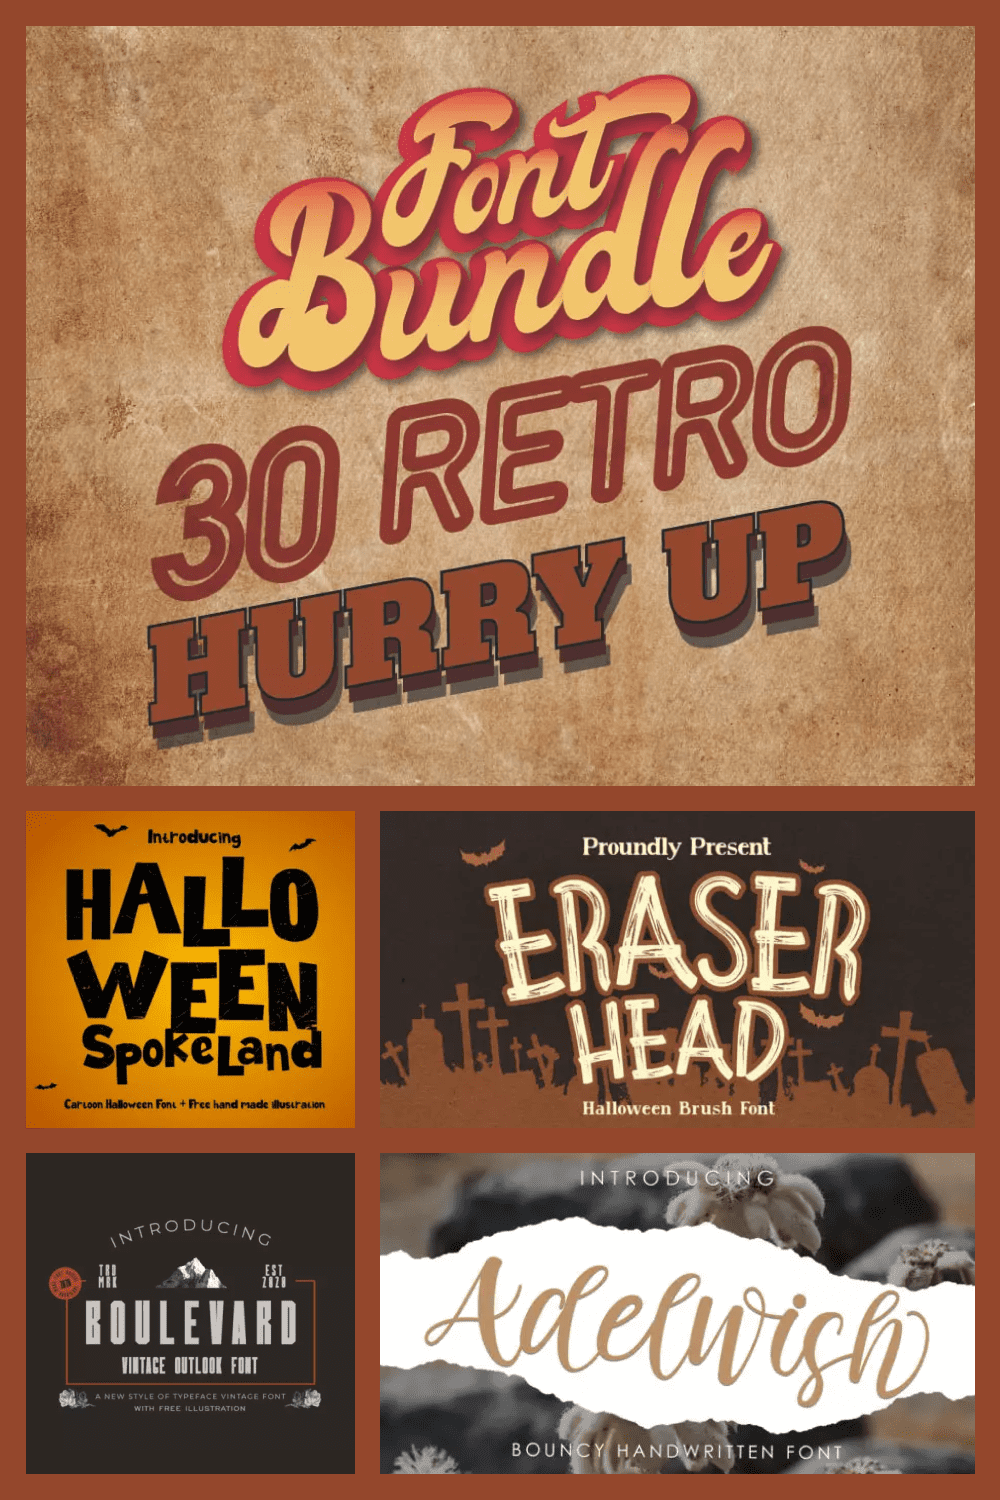 Collage of images with retro fonts on a brown background.